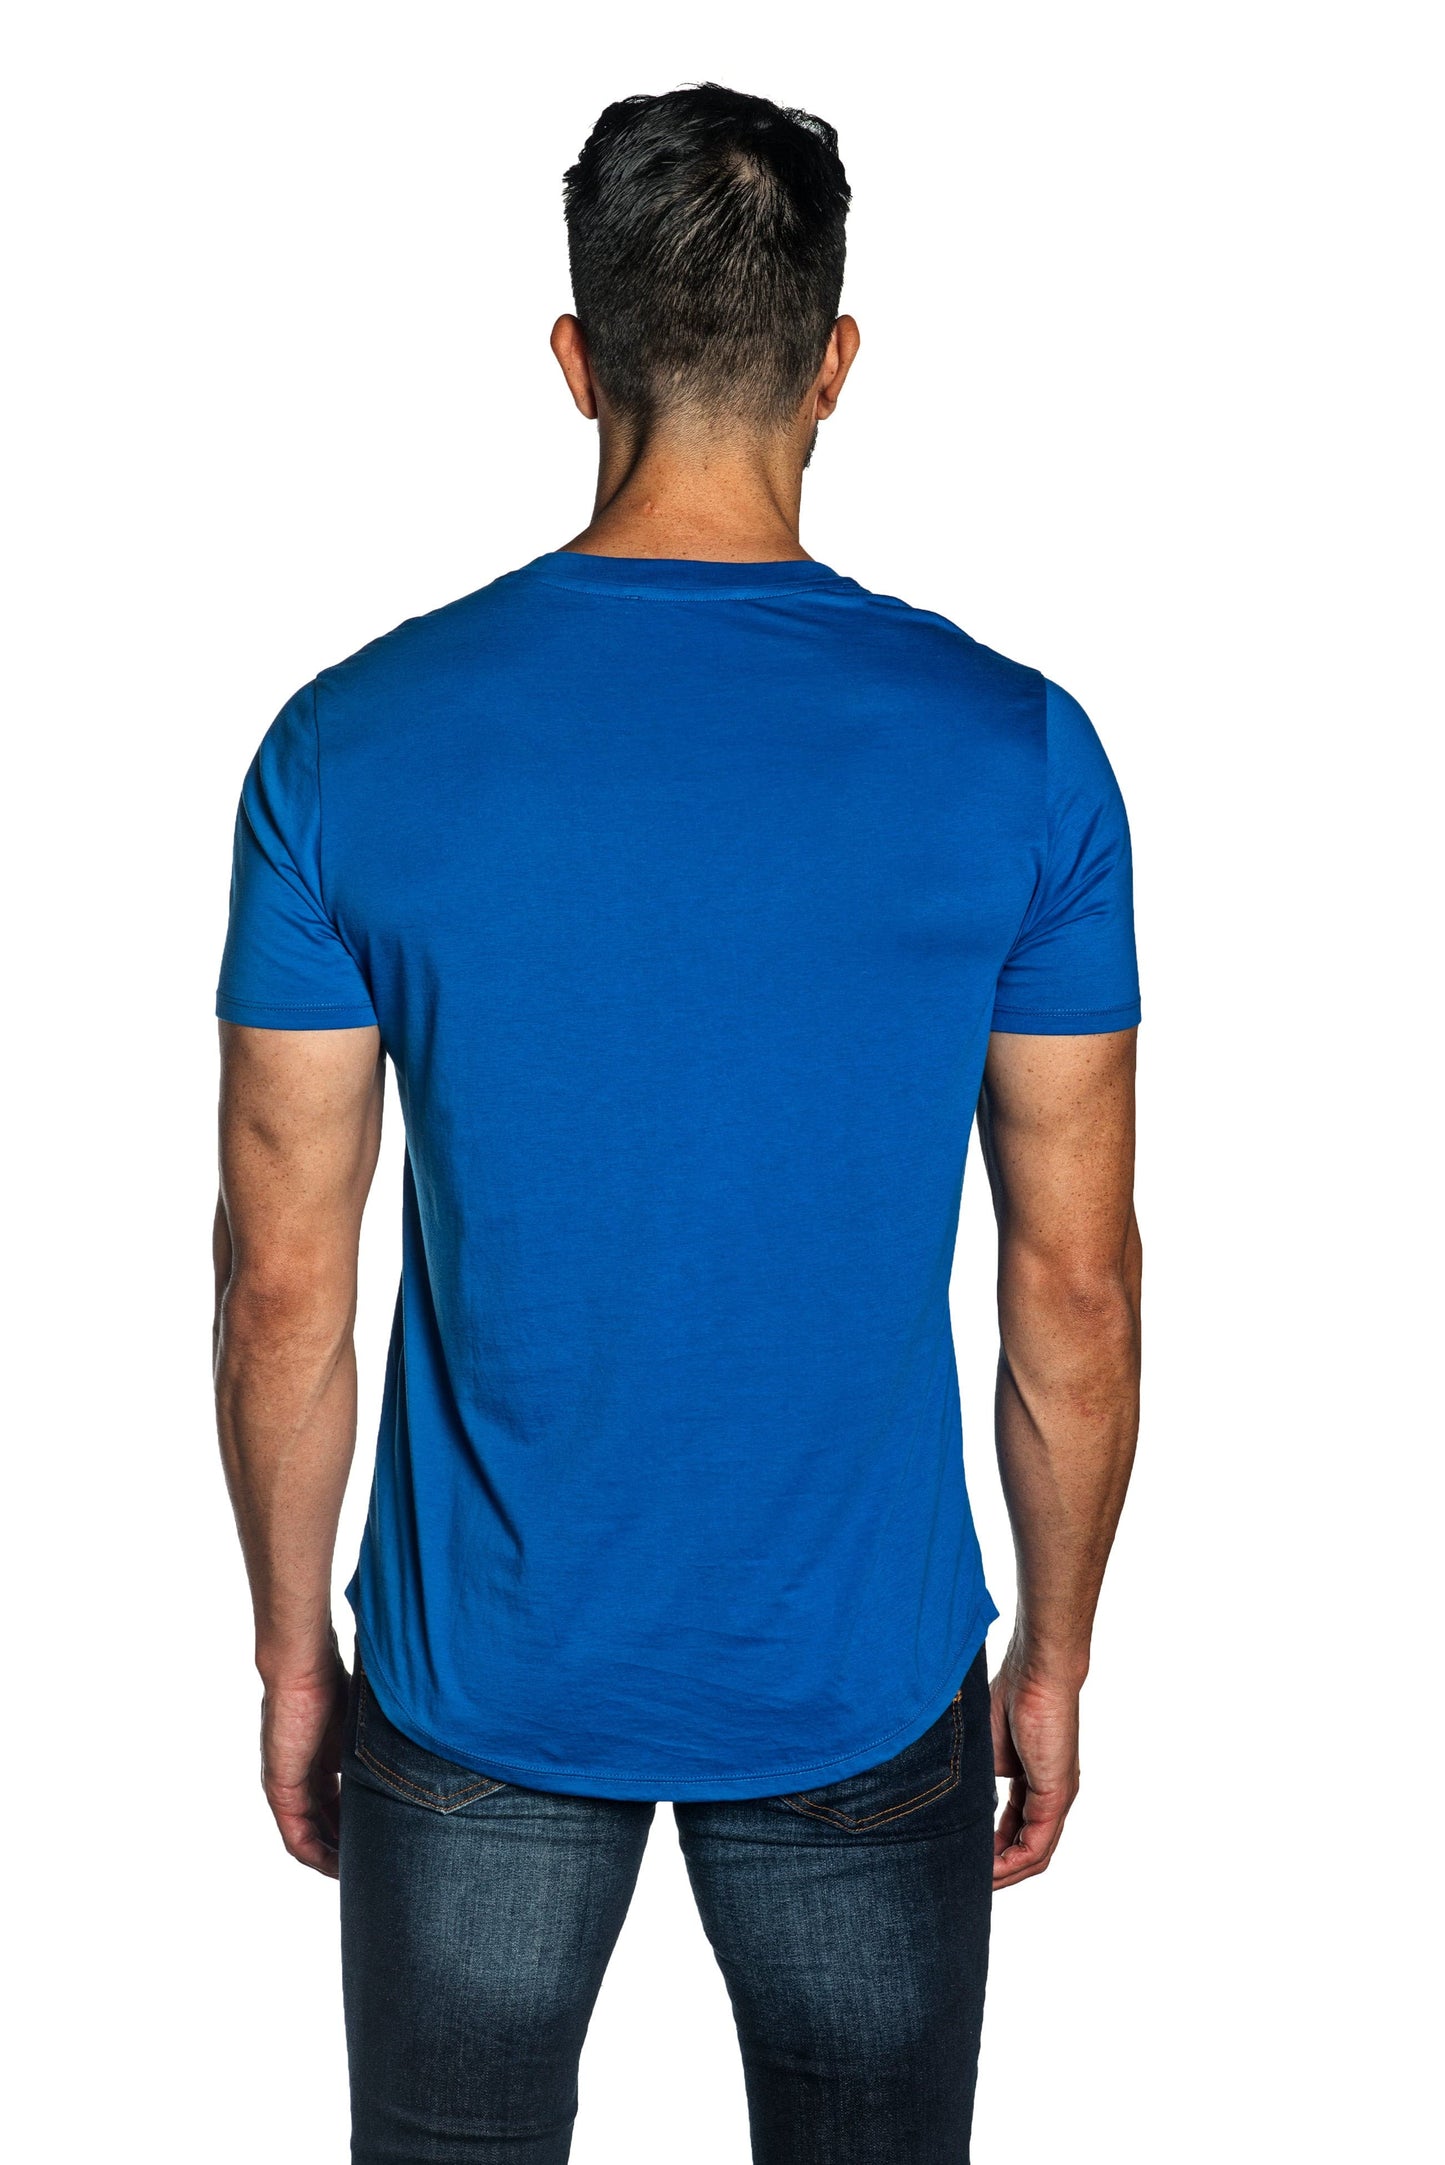 Blue Mens Tee With Star Embroidery TEE-28.